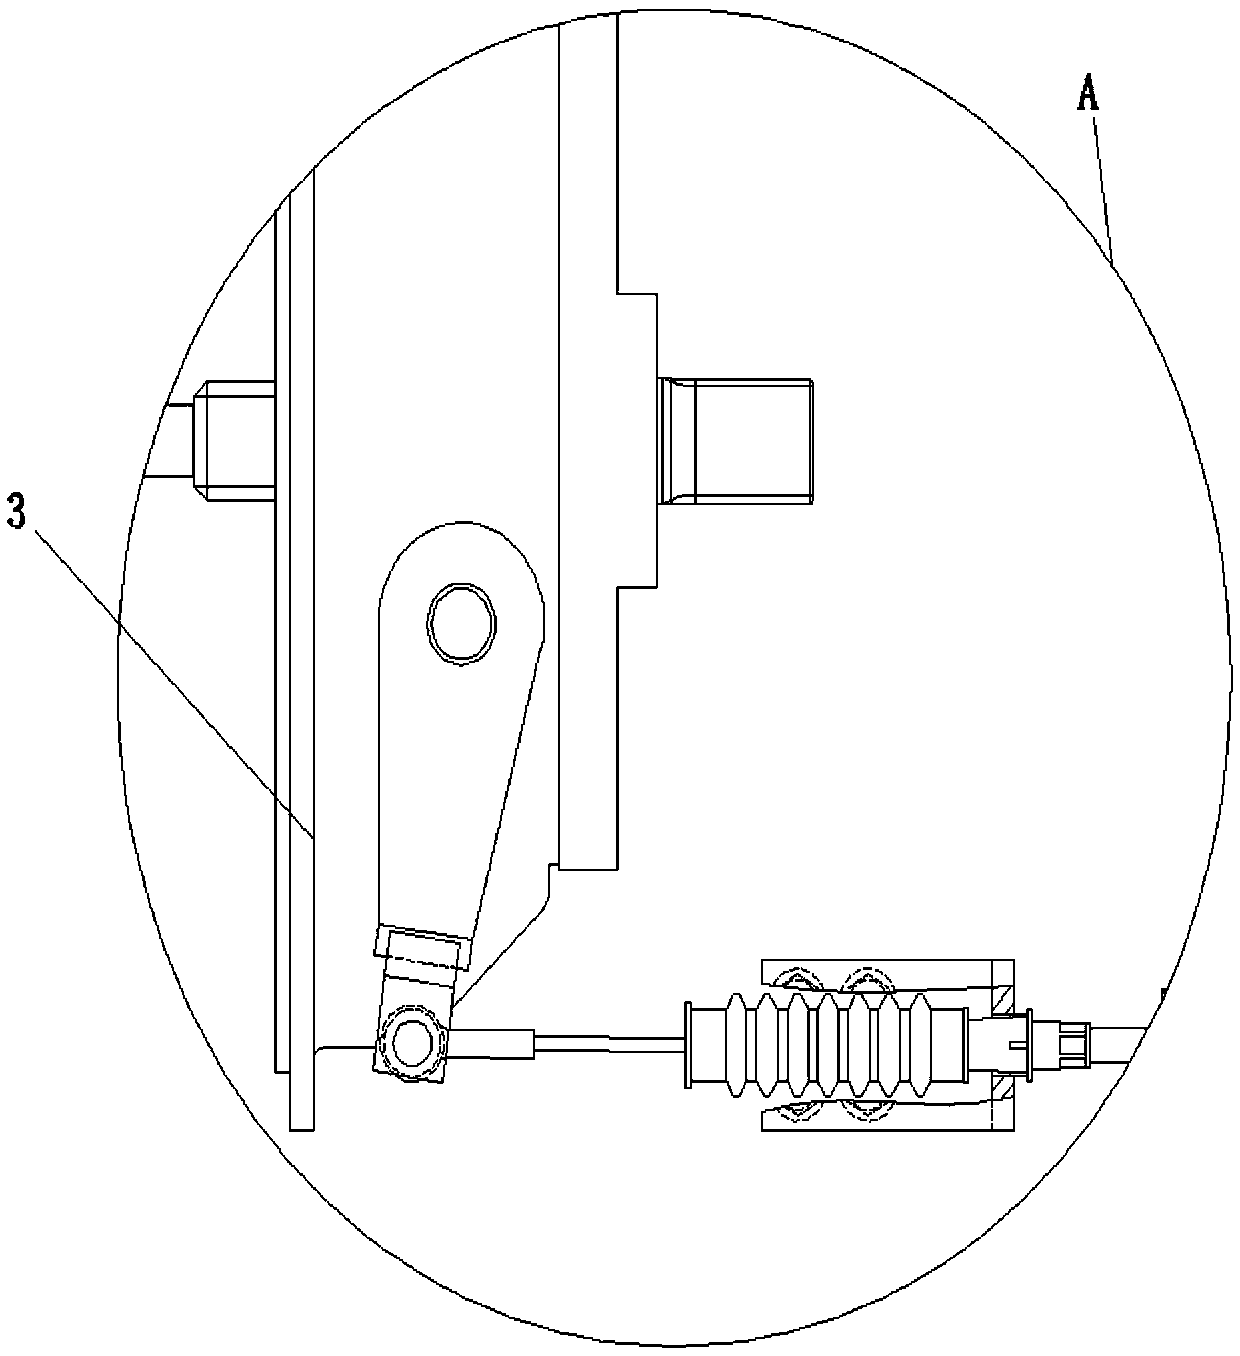 Auxiliary brake mechanism of gearbox